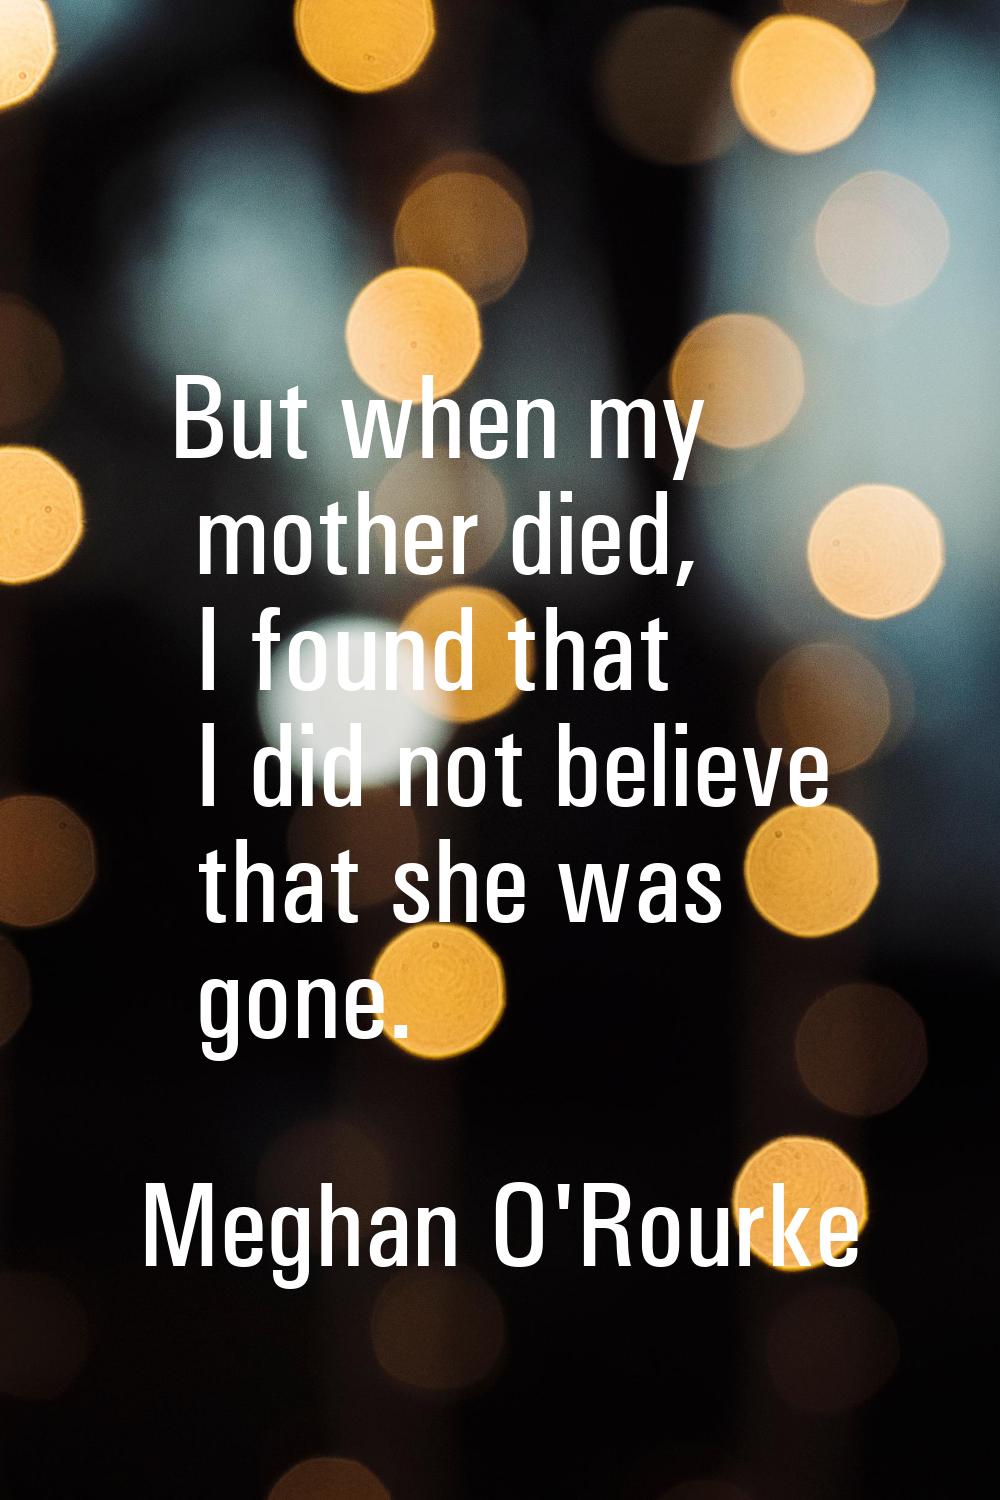 But when my mother died, I found that I did not believe that she was gone.